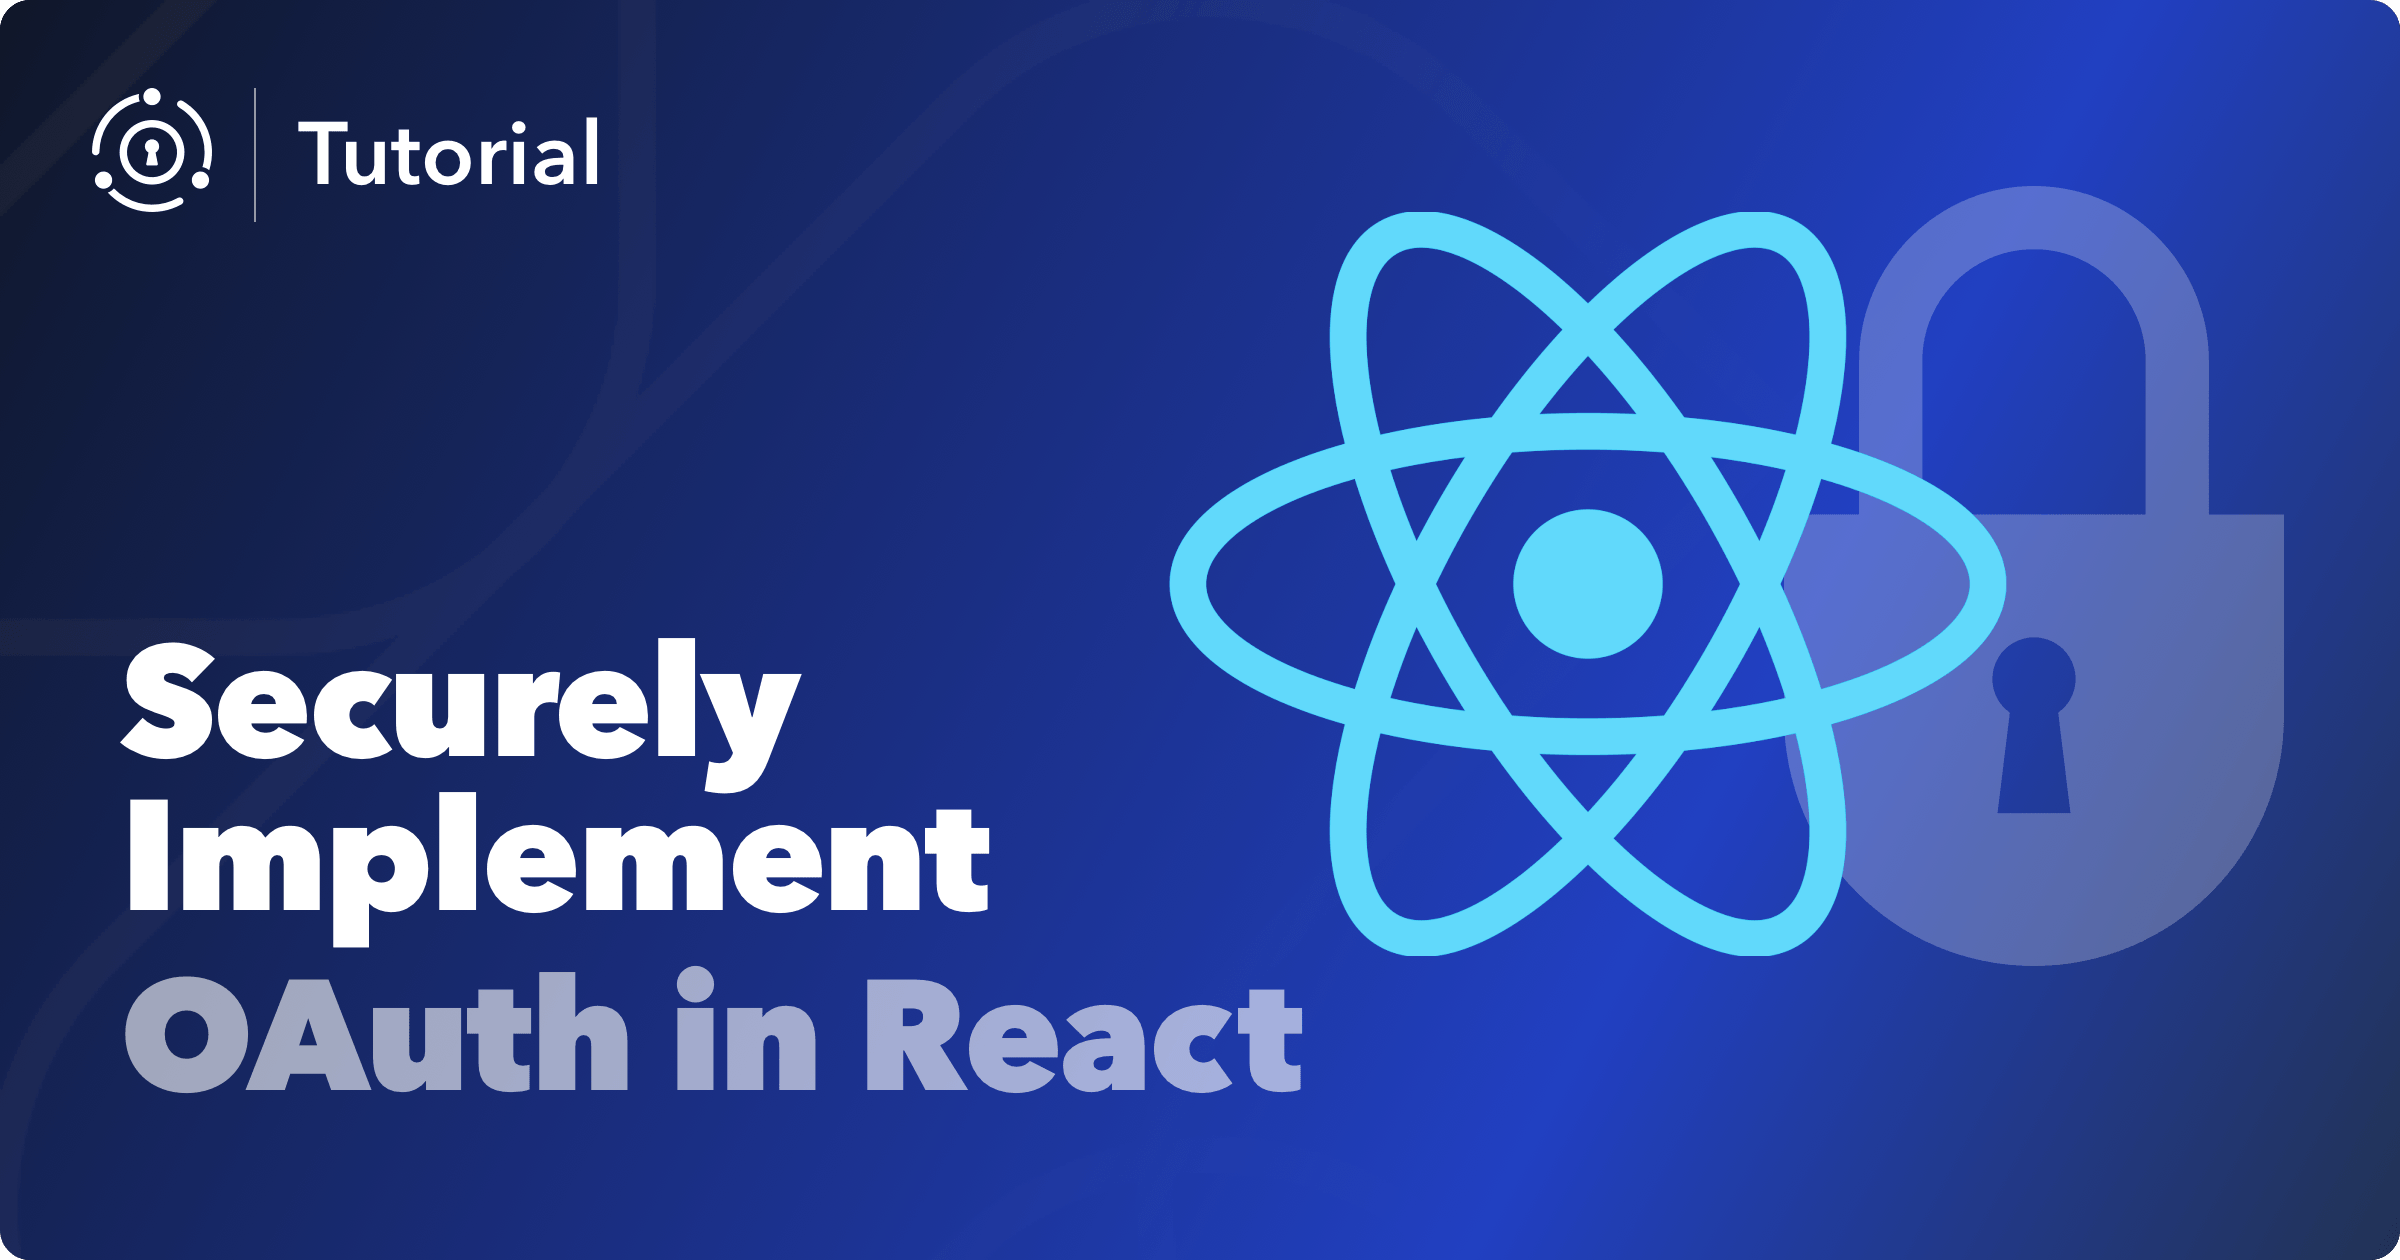 How to Securely Implement OAuth in React